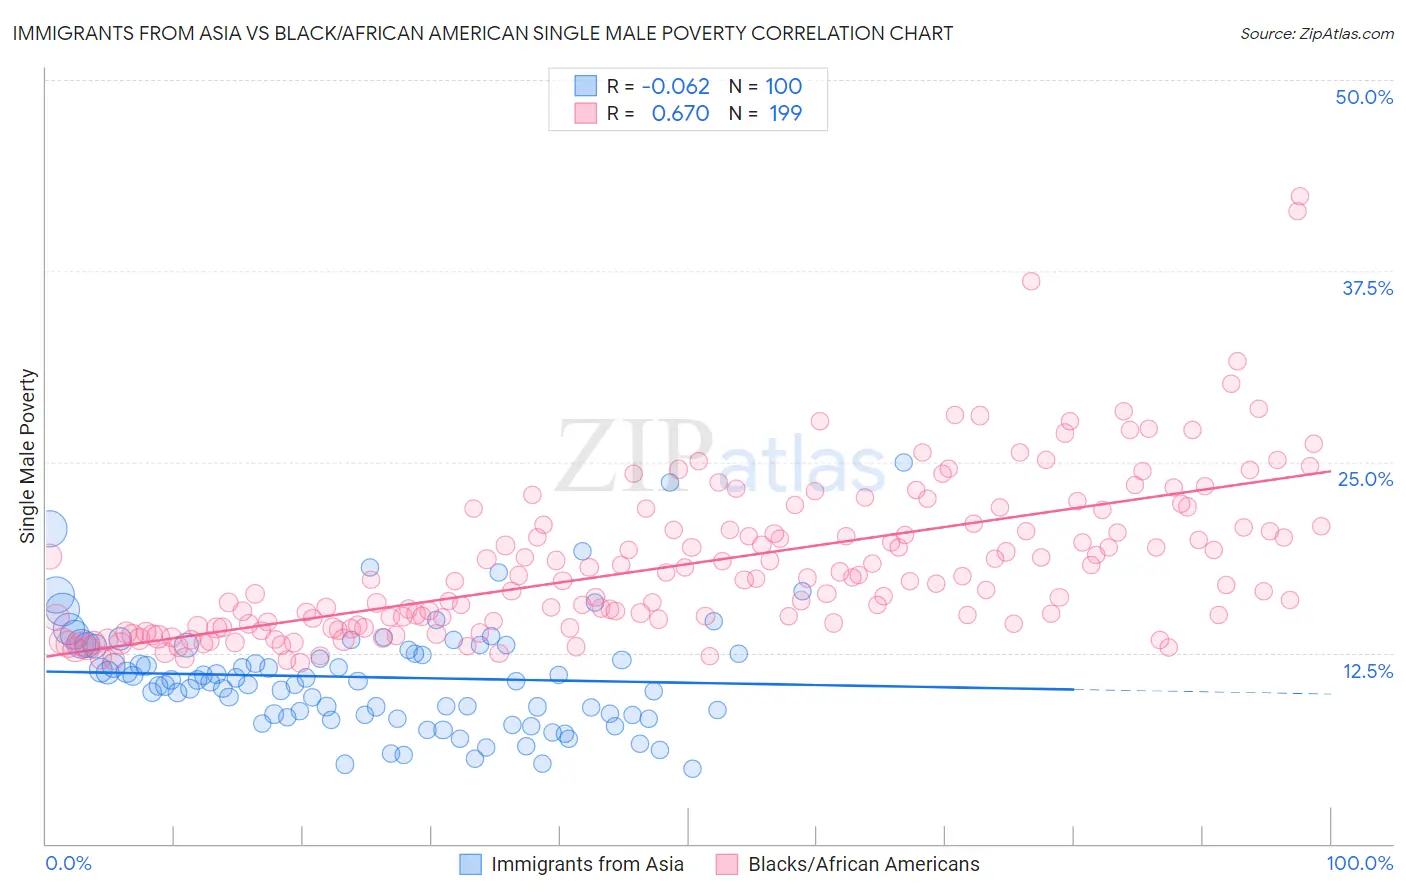 Immigrants from Asia vs Black/African American Single Male Poverty